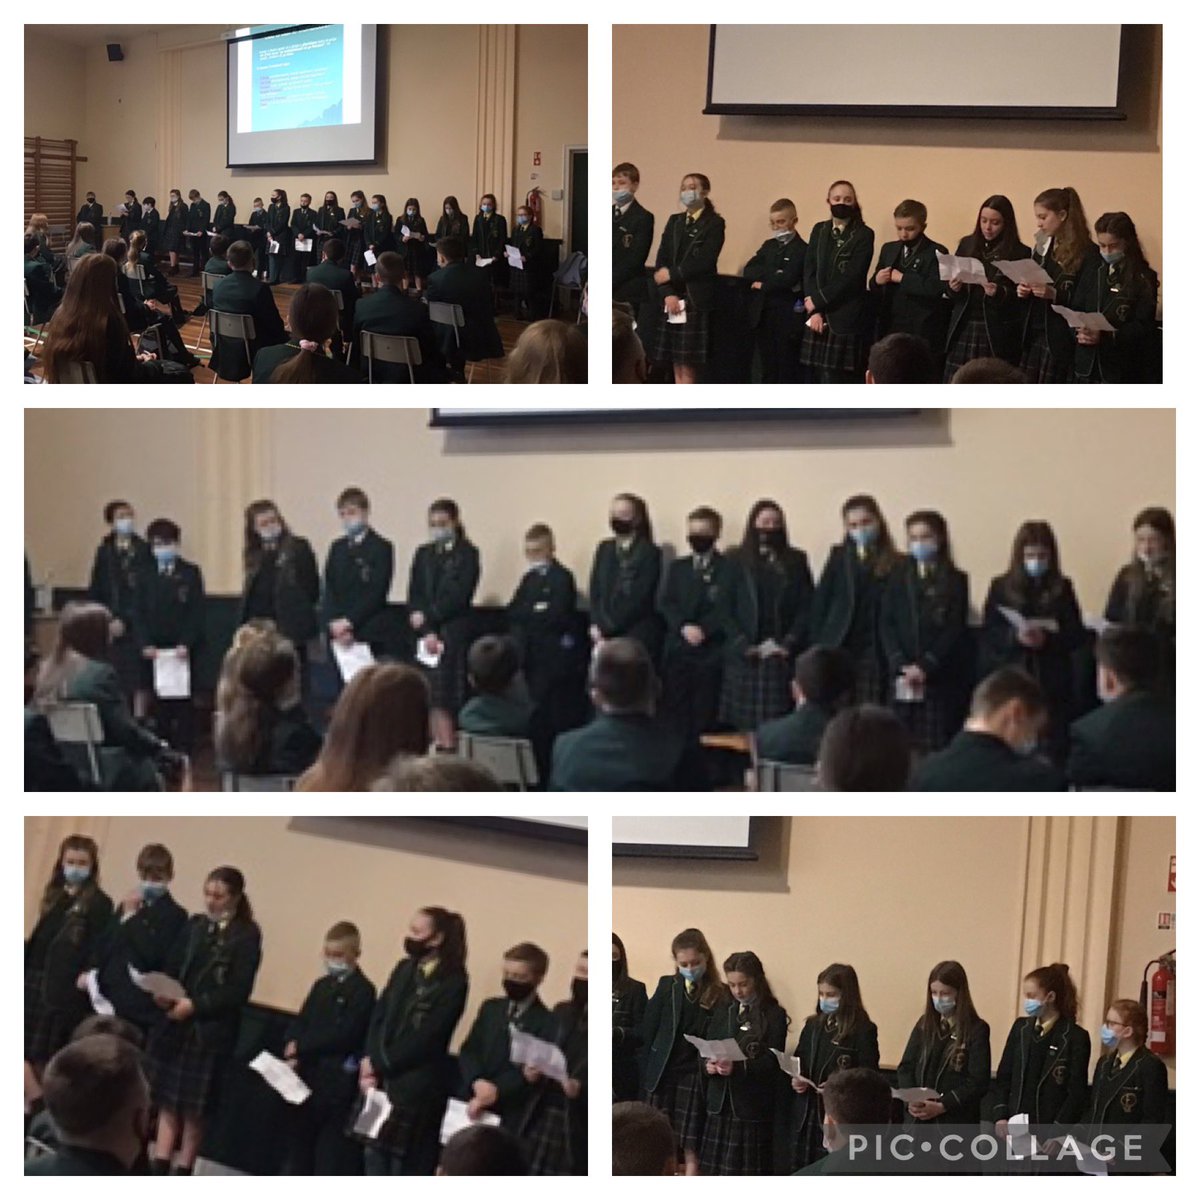 Today, our anti bullying Ambasadóirí presented Assembly for #antibullyingweek2021 It was a very informative presentation with a key message - Kindness fuels kindness. #togetherwecandomore #kindness #corevalues